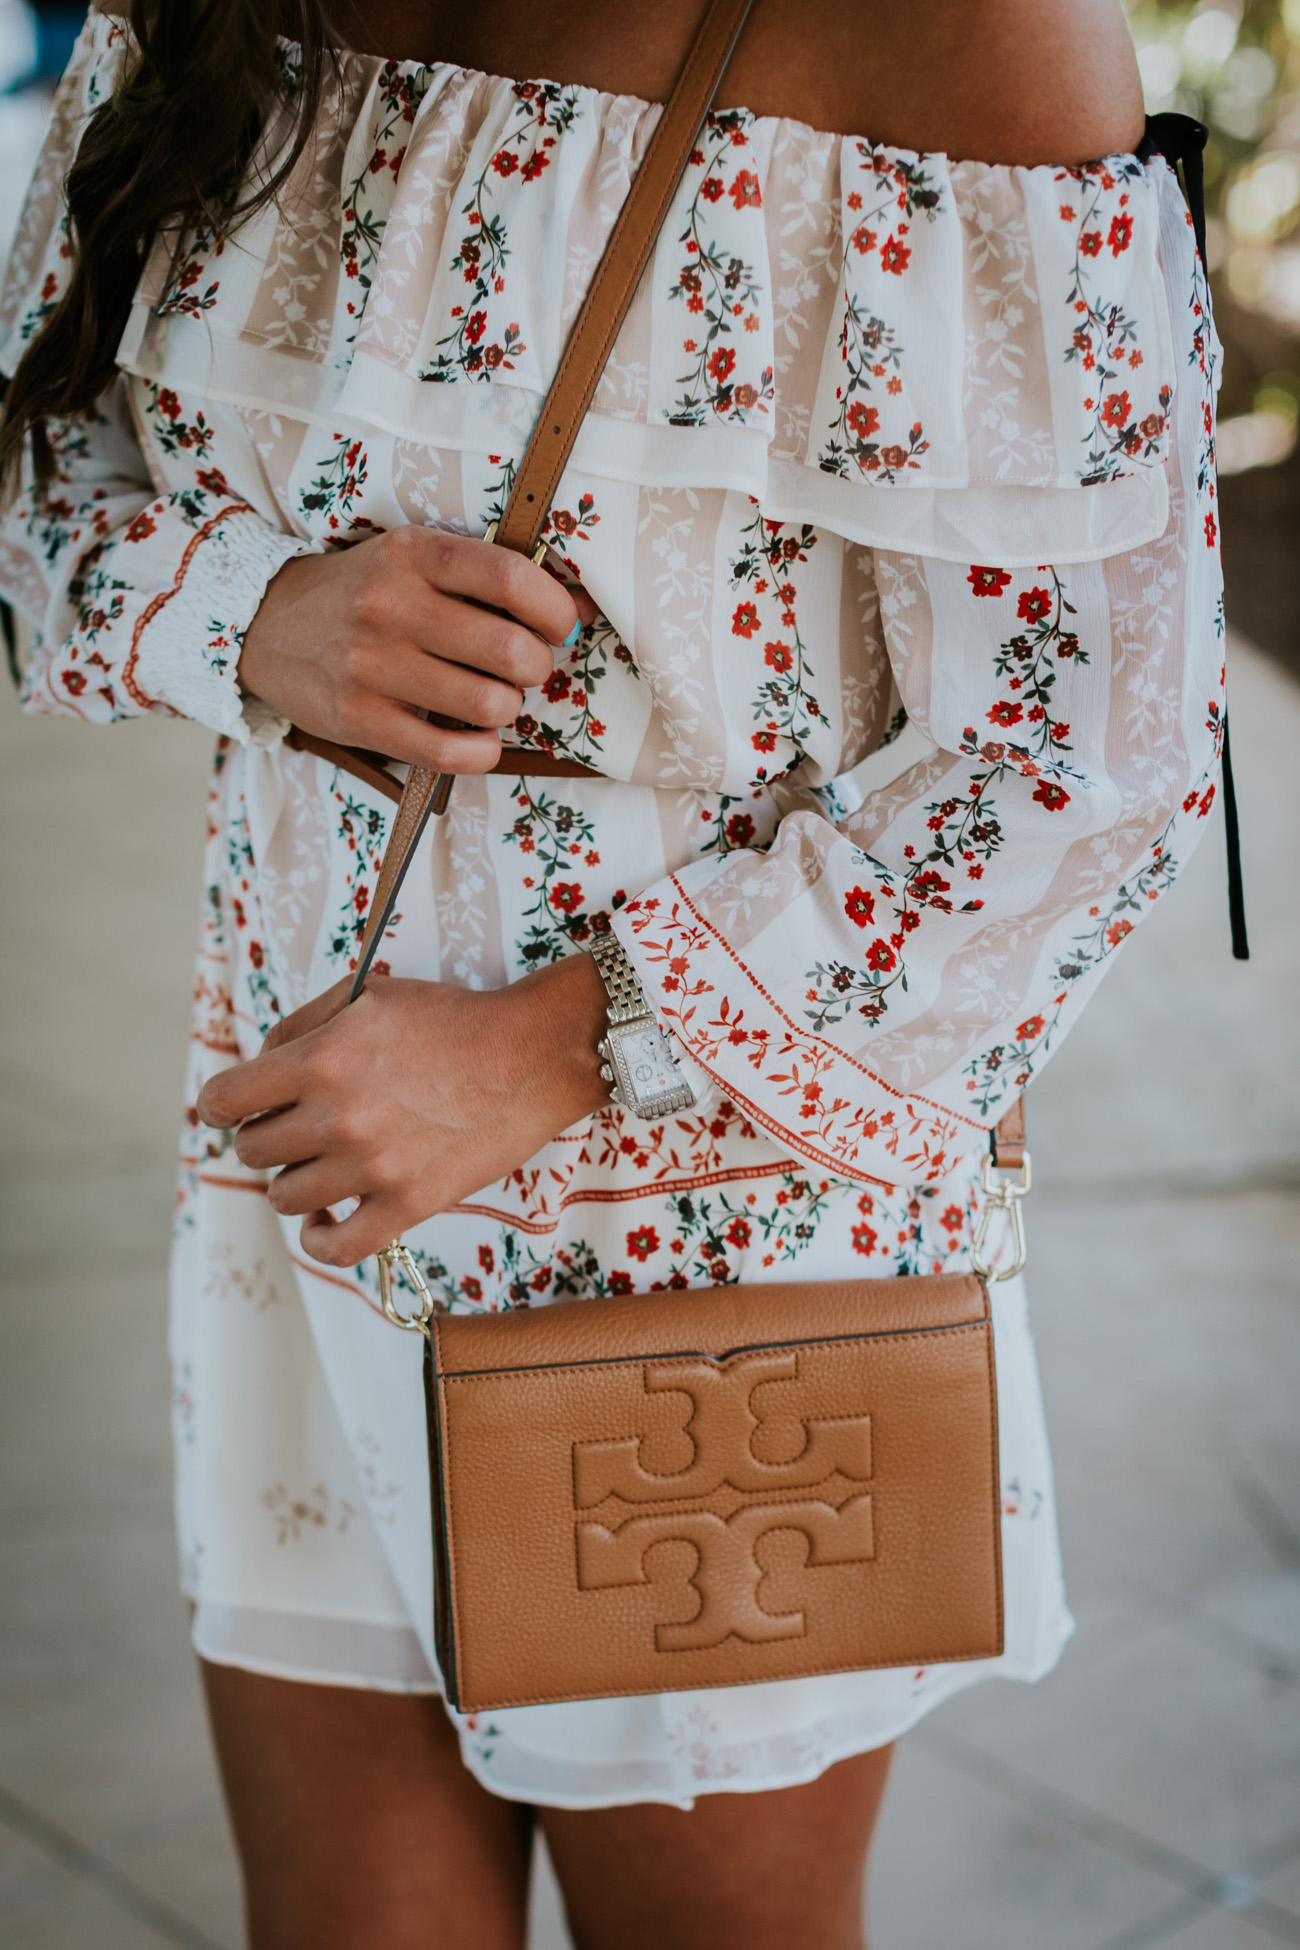 ruffle floral dress, ruffle off the shoulder dress, endless rose dress, steve madden carrson sandal, tory burch private sale, tory burch crossbody bag, vacation outfit, vacation style, spring fashion, spring style // grace wainwright a southern drawl